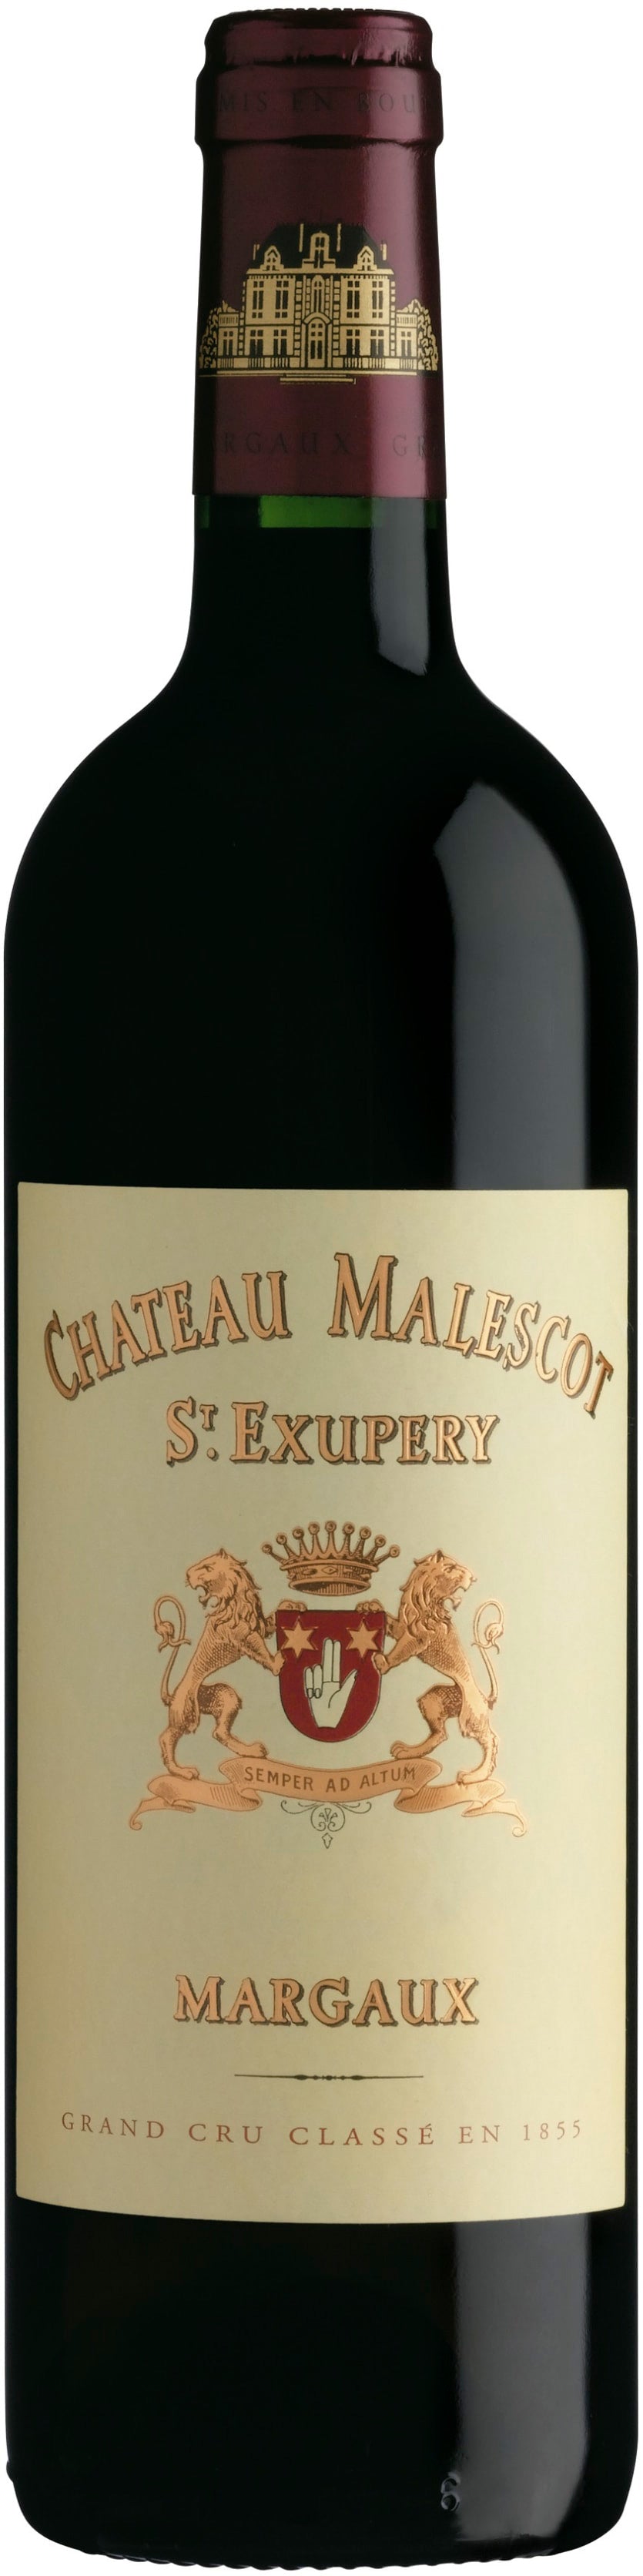 CH MALESCOT ST EXUPERY